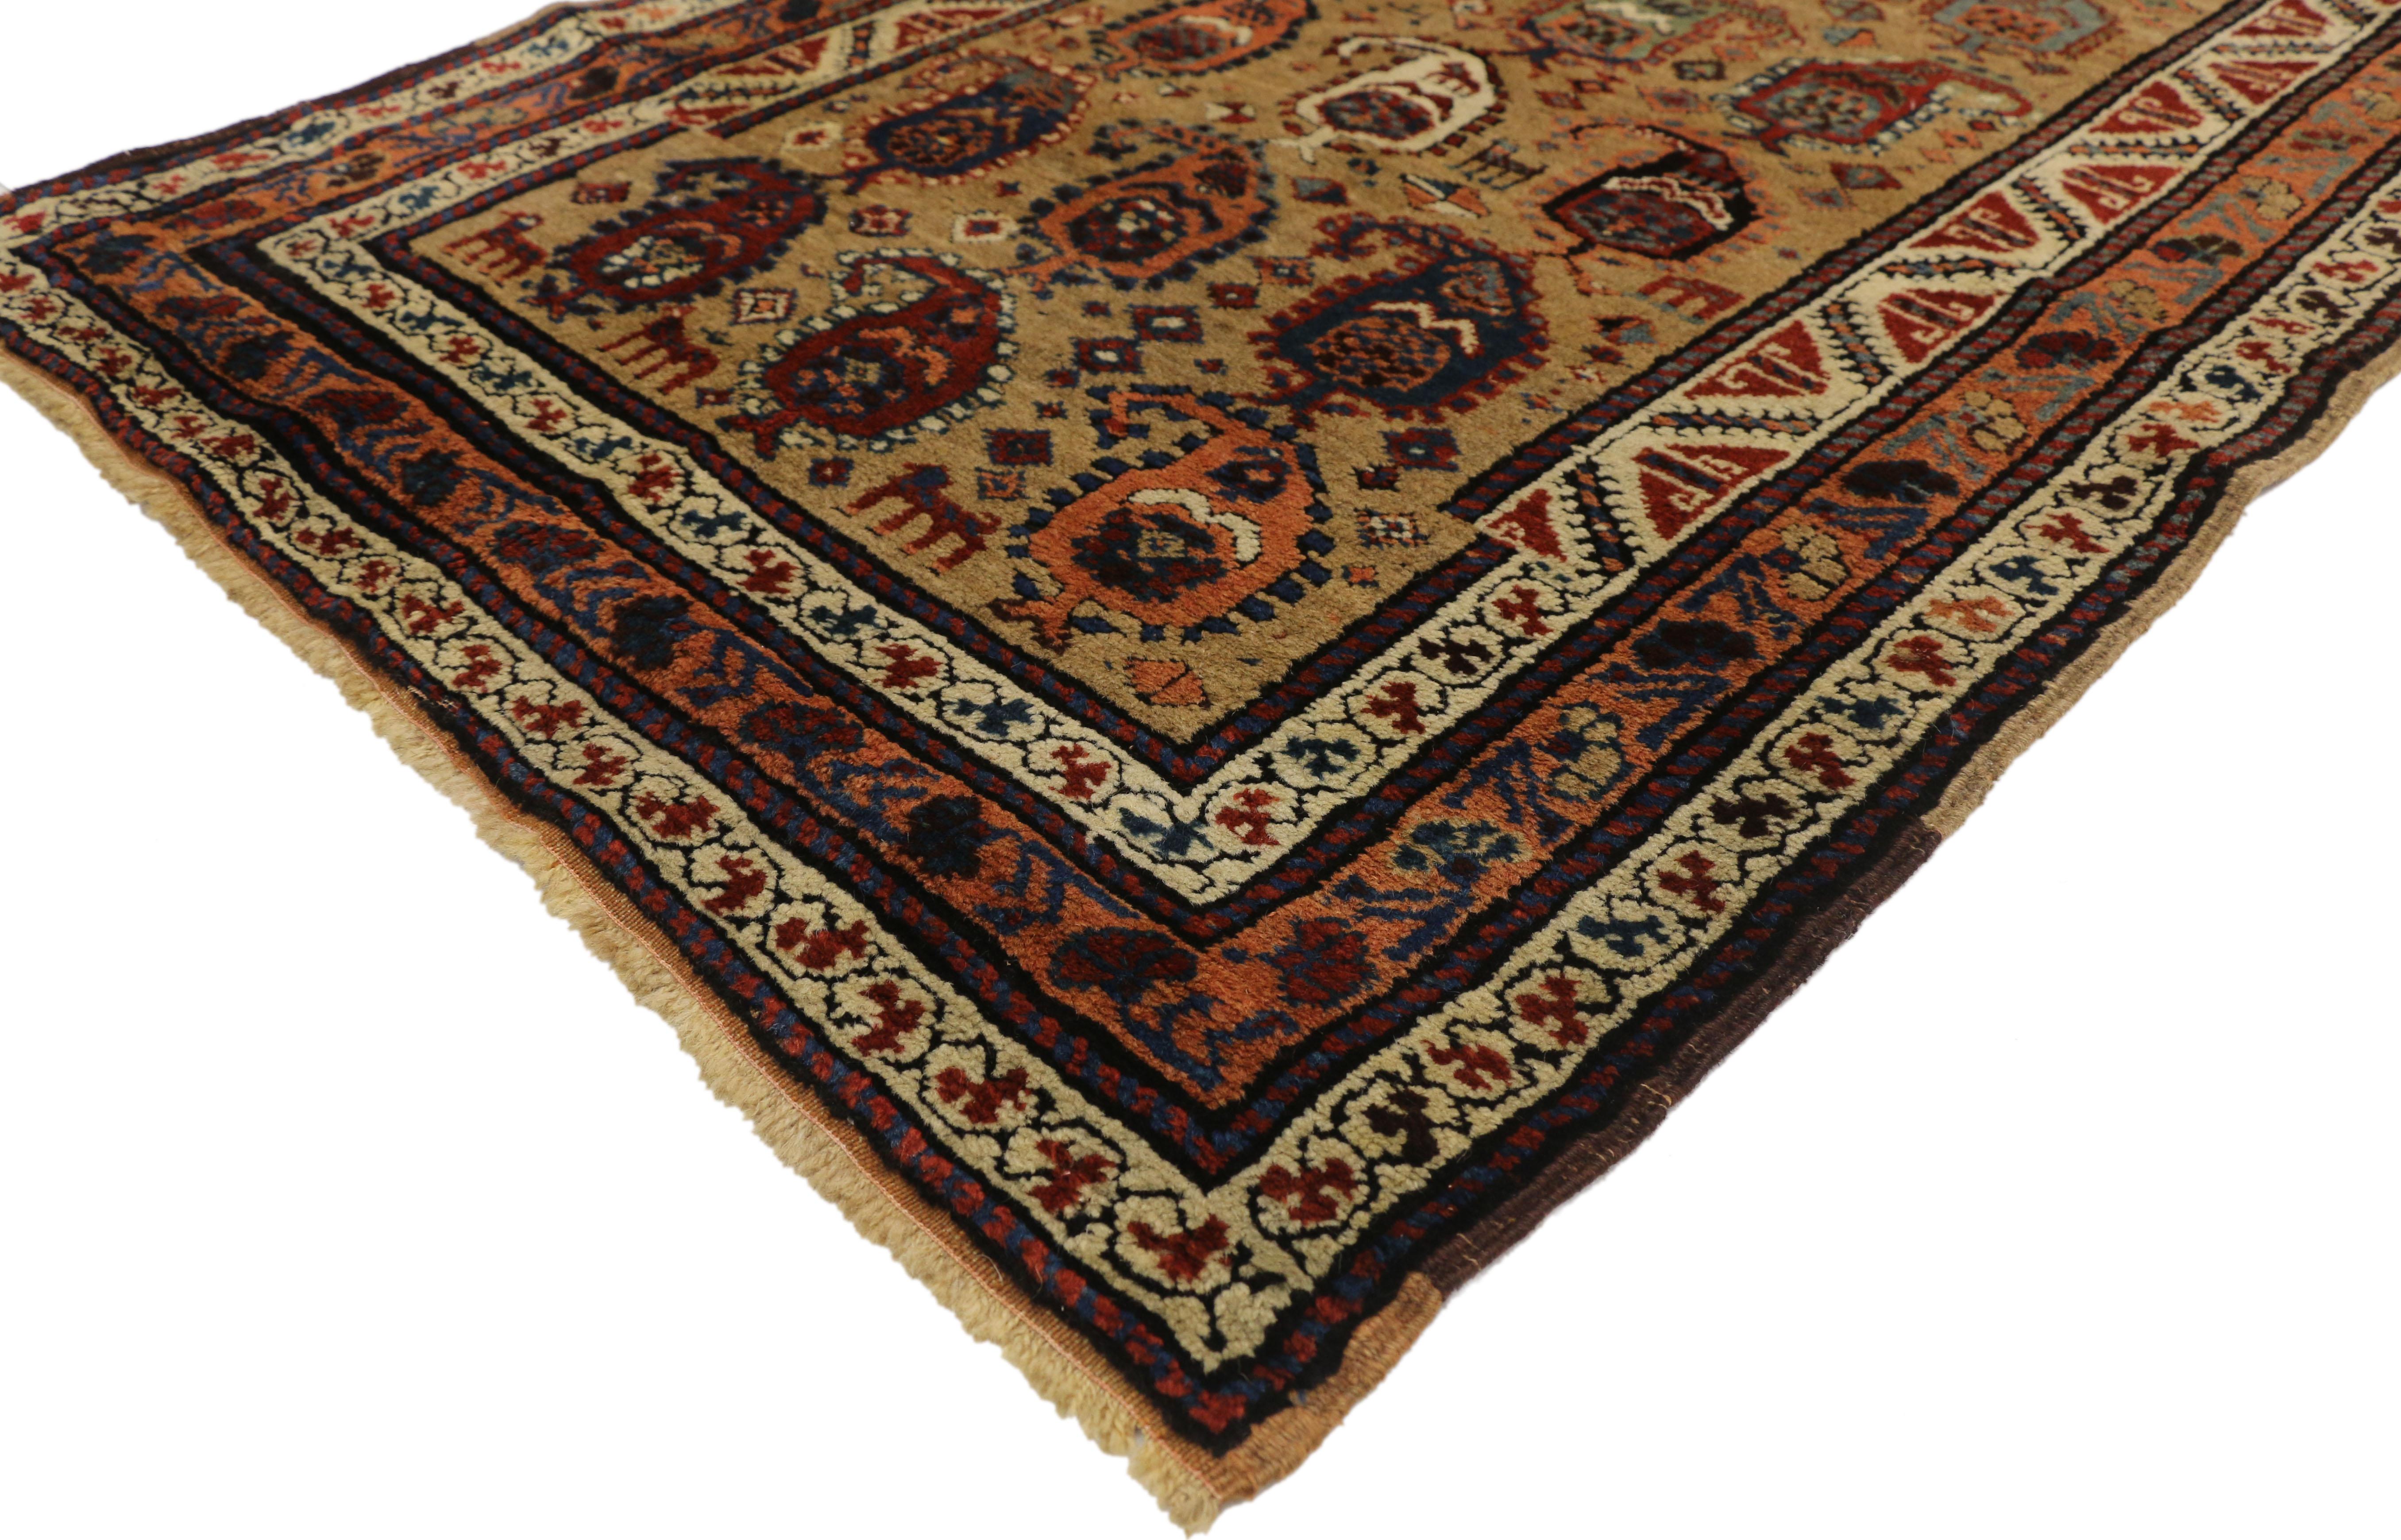 77290 antique Persian Kurdish hallway runner with Nomadic Mid-Century Modern style. With architectural elements combined with warm earthy colors, this hand knotted wool antique Persian Kurdish hallway runner embodies an Artisan Nomadic style with